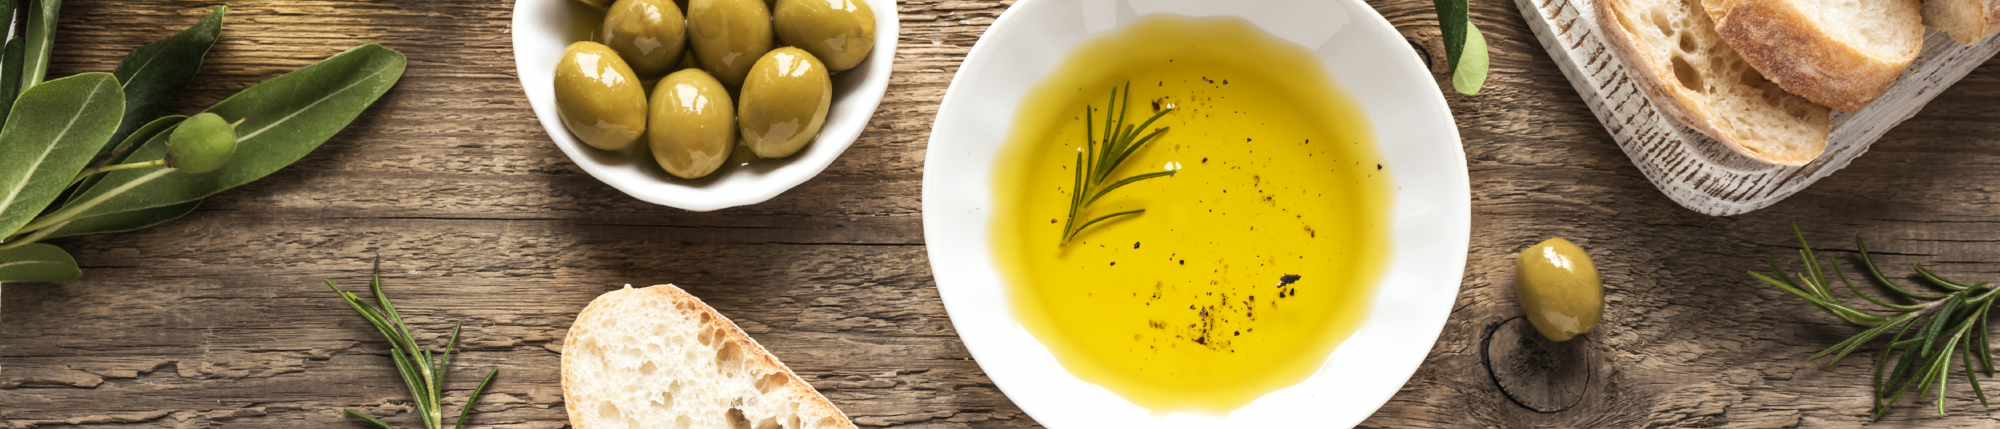 Extra Virgin Olive Oil: buy now at unbeatable prices on ParmaShop